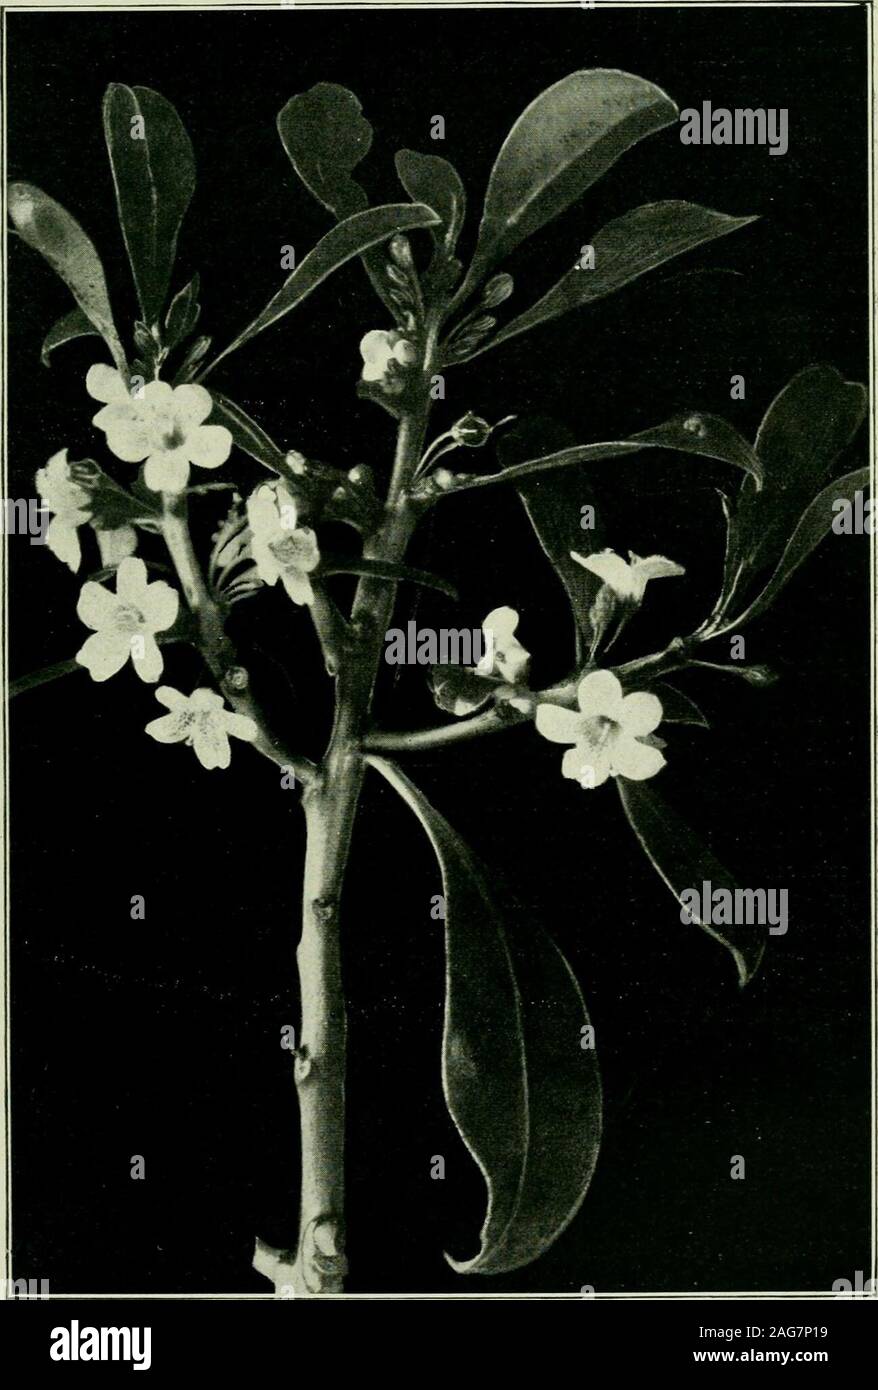 . Plants of New Zealand. Fig. 119. Ngaio tree on the sea-beach. Myoporum laetum {The Ngaio). A small tree, 10 ft.-20 ft. in height. Leaves 2 in.-4 in. long, lanceolate, acute,,partially serrate, bright-green, shining. Flowers 2-6 together. Corolla J in.-§ in.broad, white, spotted with lilac. Drupe jin. long. Both islands : usuallynear the sea-shore. Fl. Oct.-Dec. The Ngaio tree is well known throughout the islands.Though not restricted to the sea-coast, it is seldom foundfar inland. At times it may be met with growing almostwithin high-water mark. When young, it is a beautiful^ THE VEEBENA FAM Stock Photo